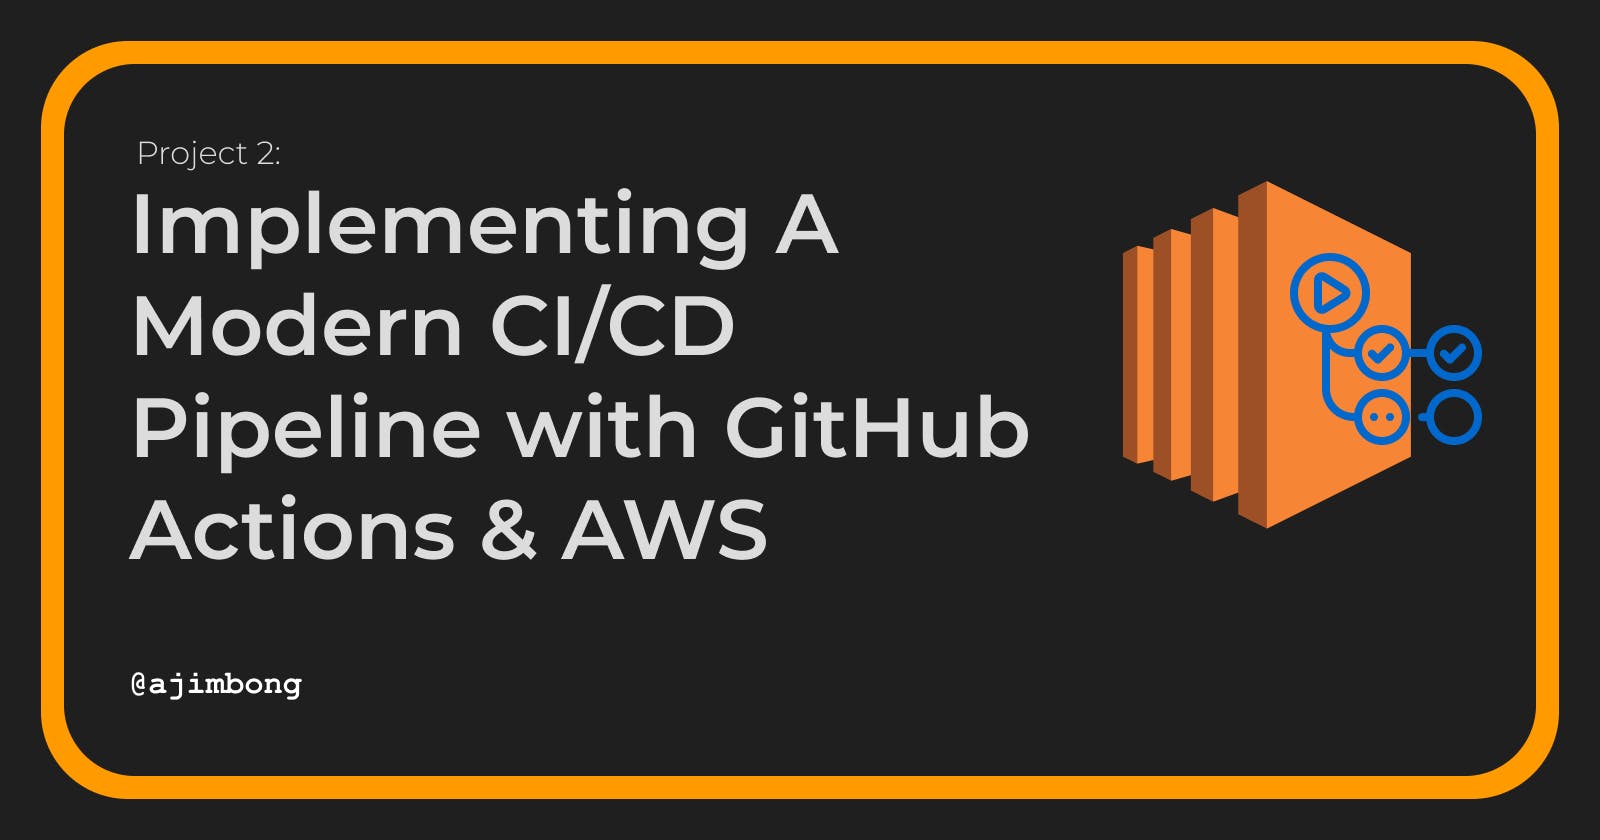 Implementing A Modern CI/CD Pipeline with GitHub Actions & AWS